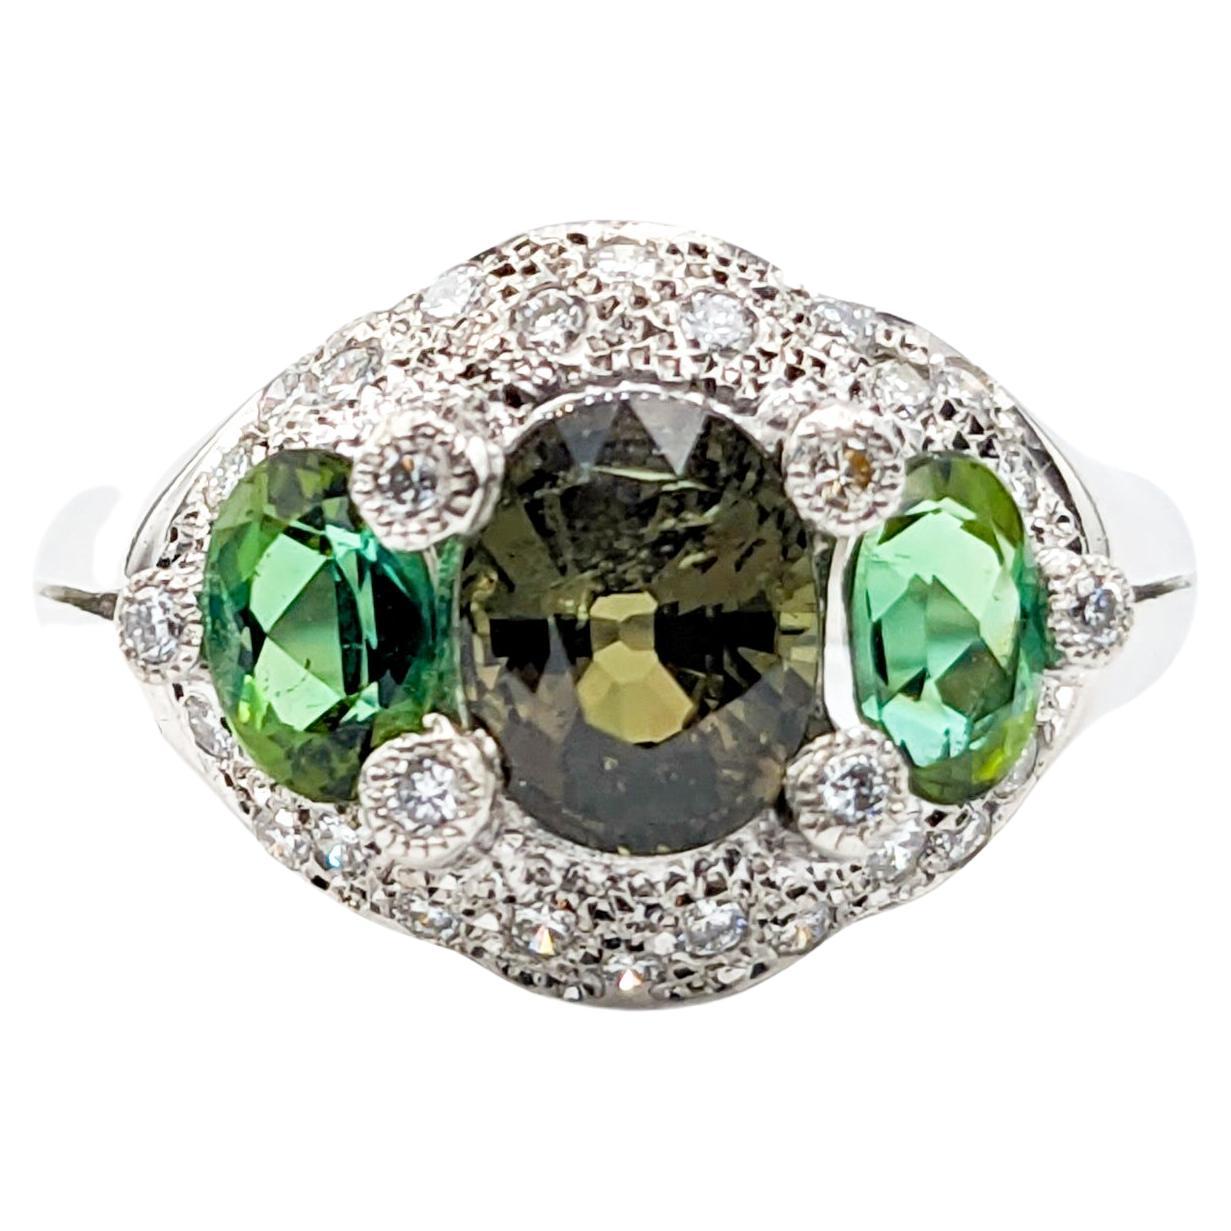 Color Transforming Platinum Alexandrite, Tourmaline & Diamond Ring

Indulge in the sheer elegance of this beautiful ring, crafted from 900pt platinum and .34ctw diamonds. The round diamonds sparkle brilliantly with their H color and SI1 clarity. The